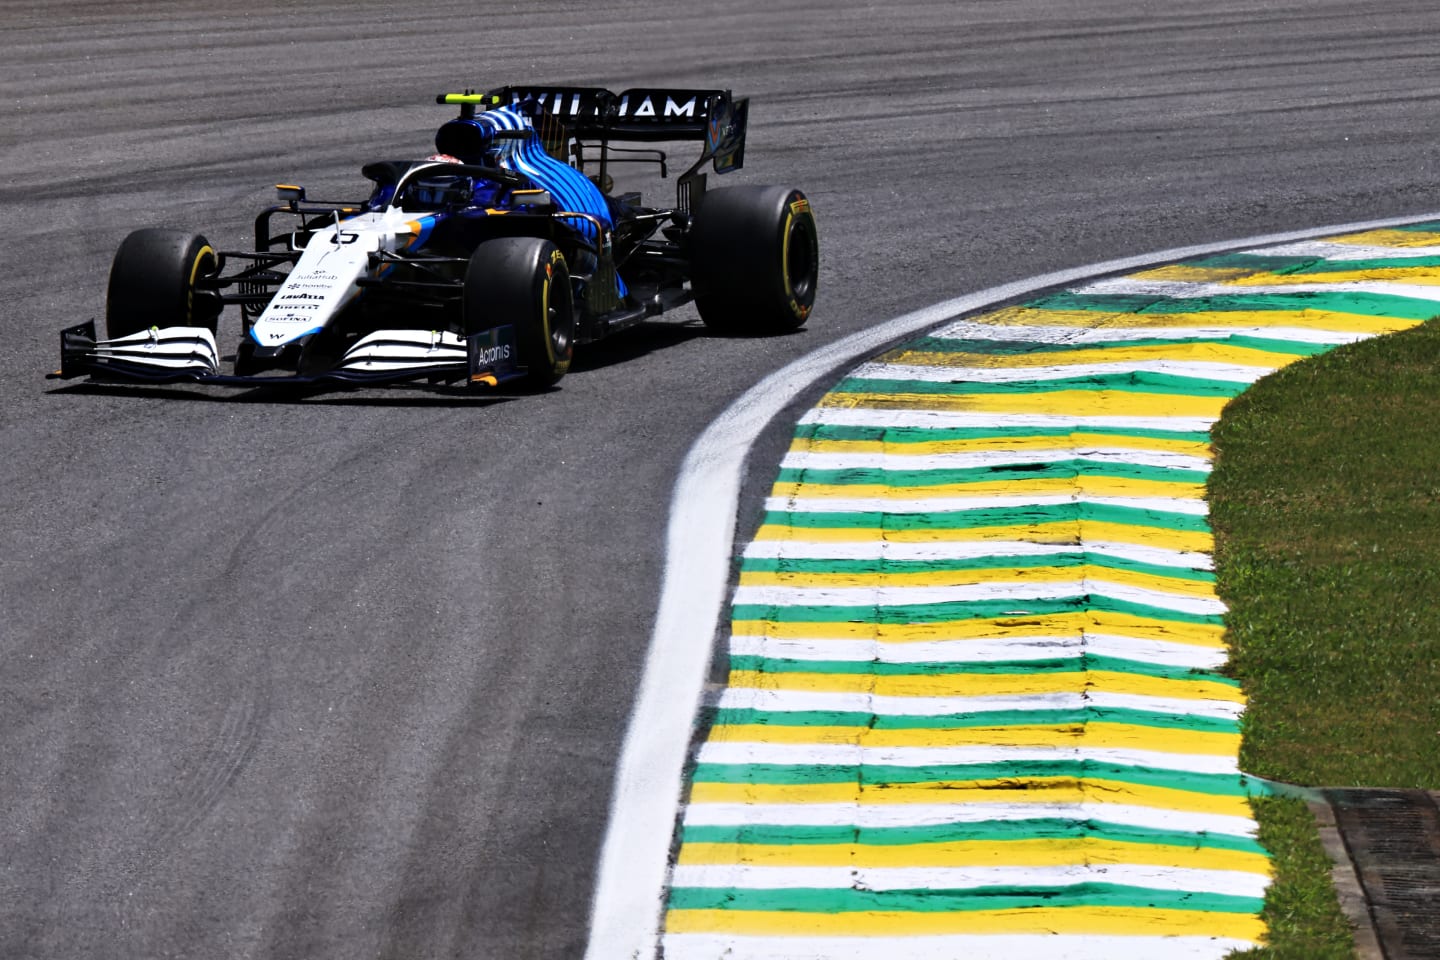 SAO PAULO, BRAZIL - NOVEMBER 13: Nicholas Latifi of Canada driving the (6) Williams Racing FW43B Mercedes during practice ahead of the F1 Grand Prix of Brazil at Autodromo Jose Carlos Pace on November 13, 2021 in Sao Paulo, Brazil. (Photo by Buda Mendes/Getty Images)